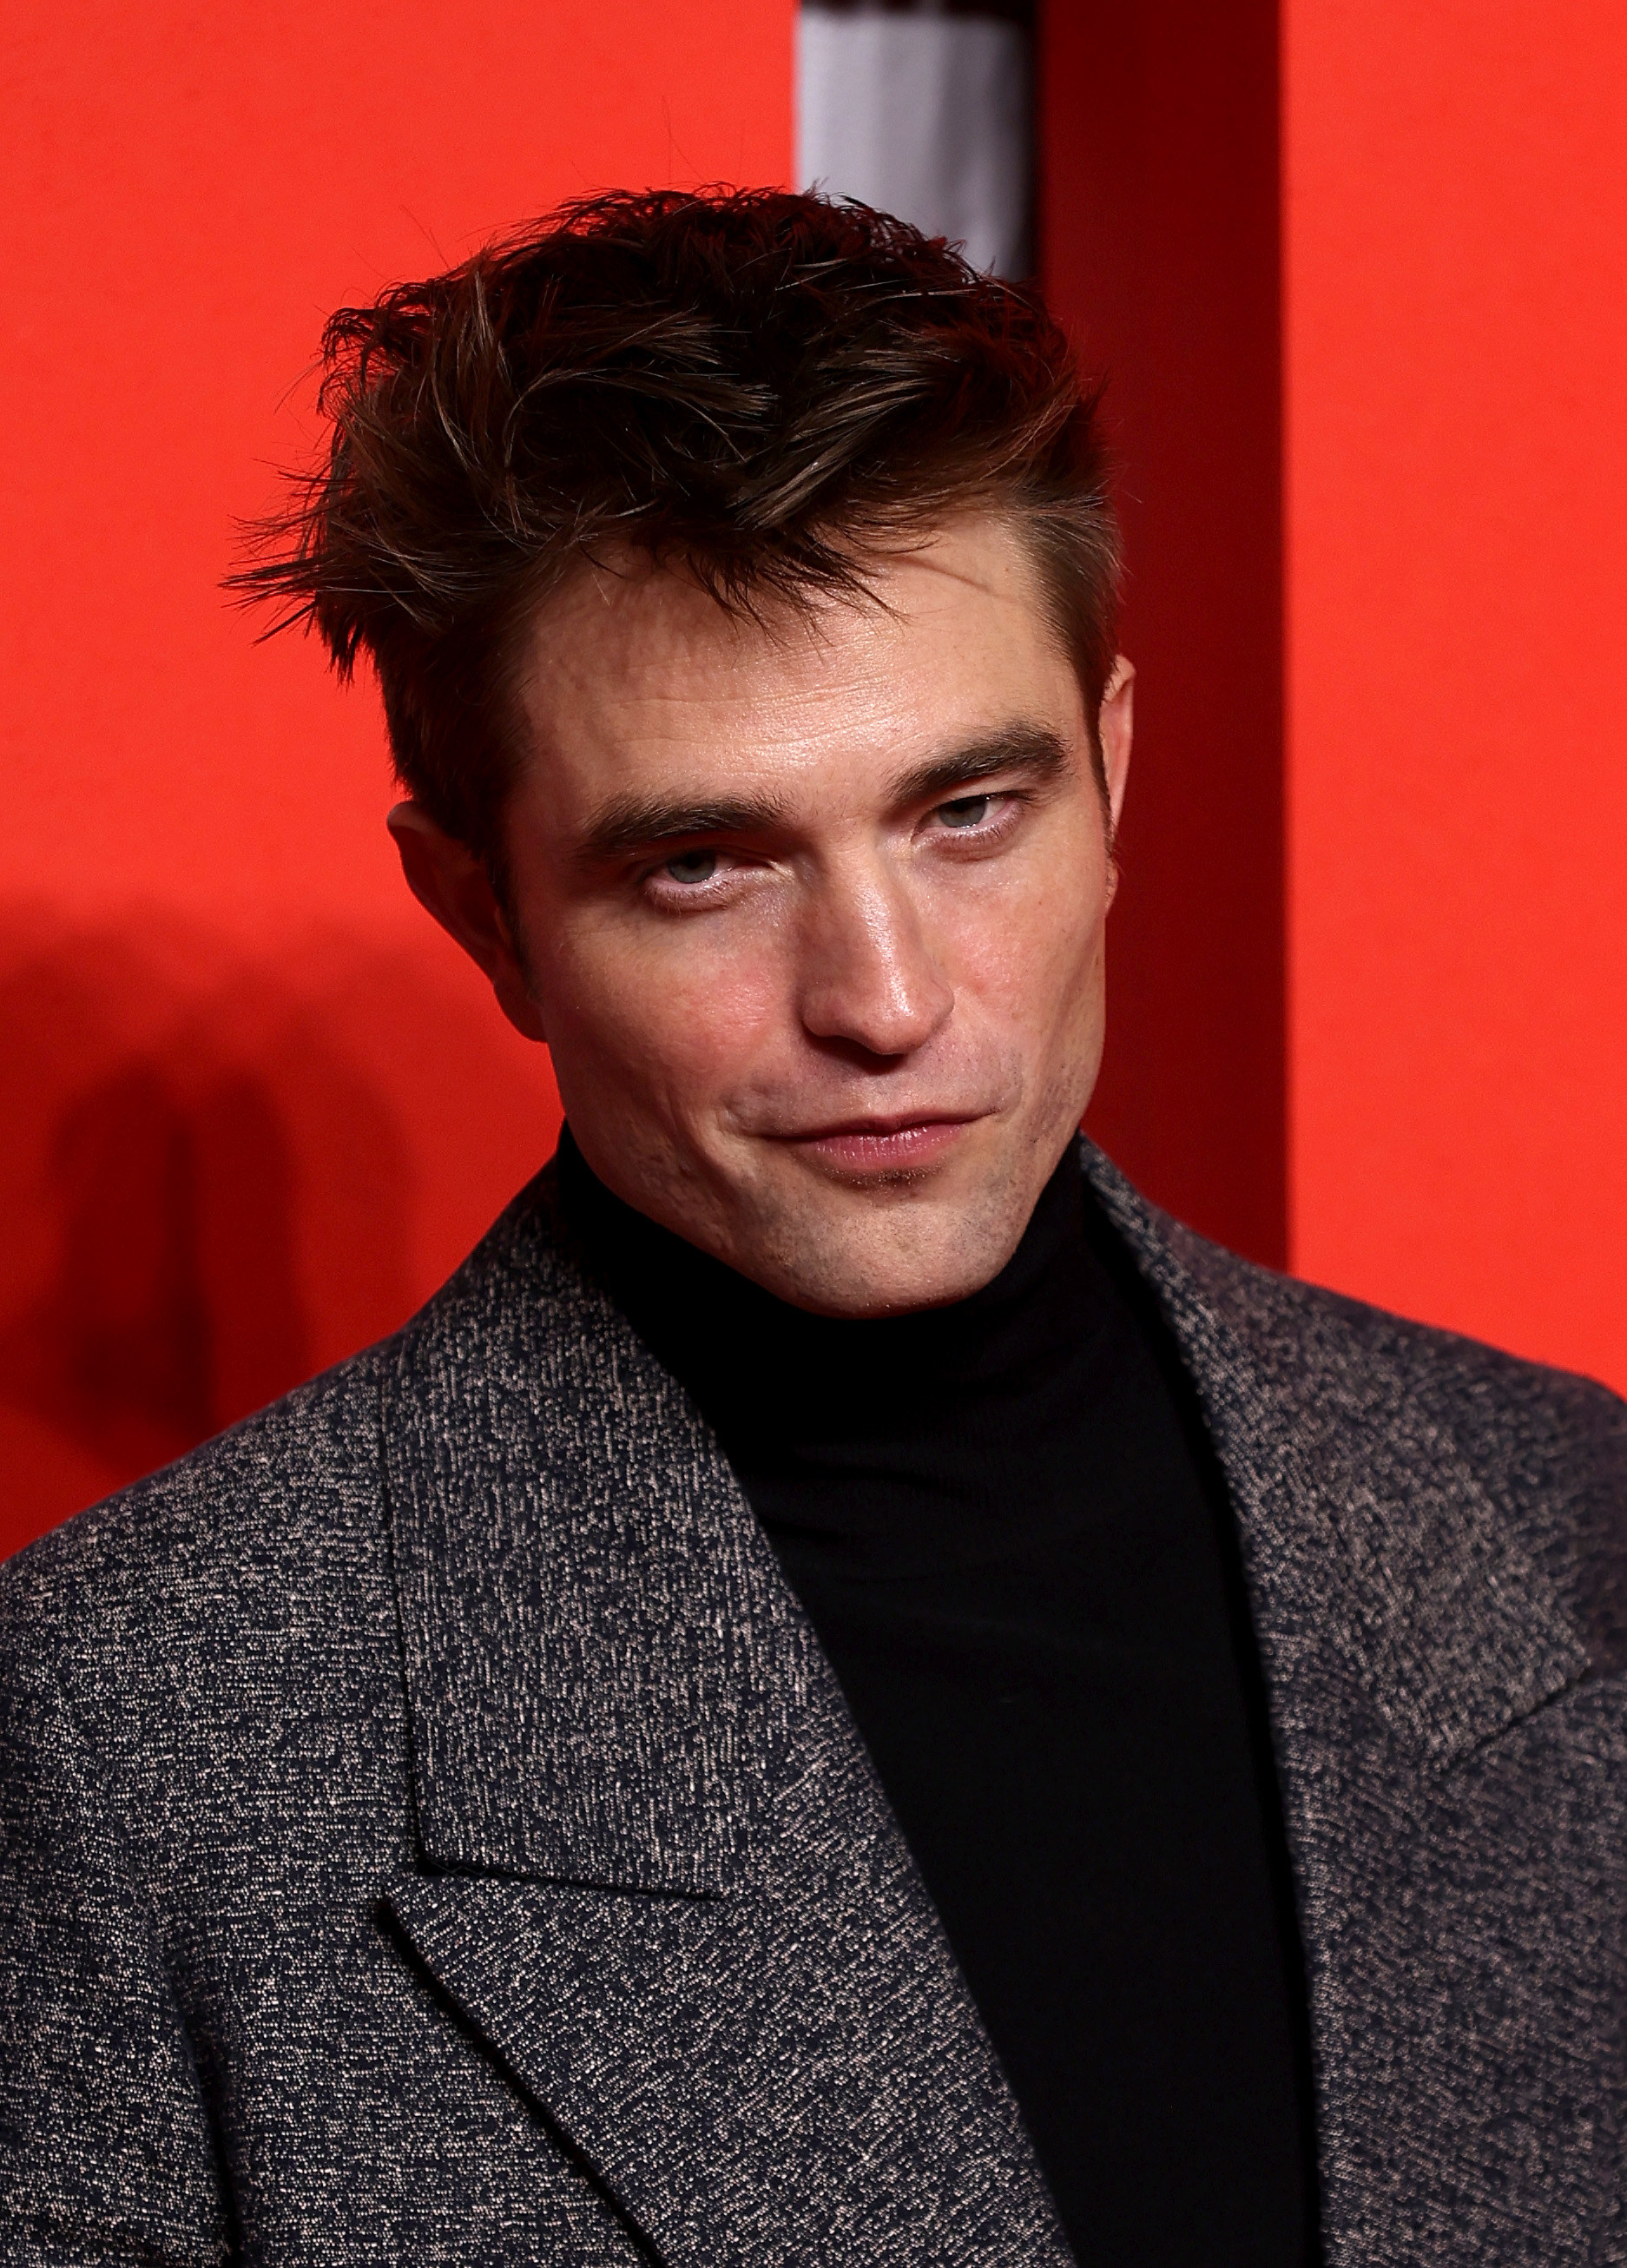 Robert Pattinson shares his experience with body image as a